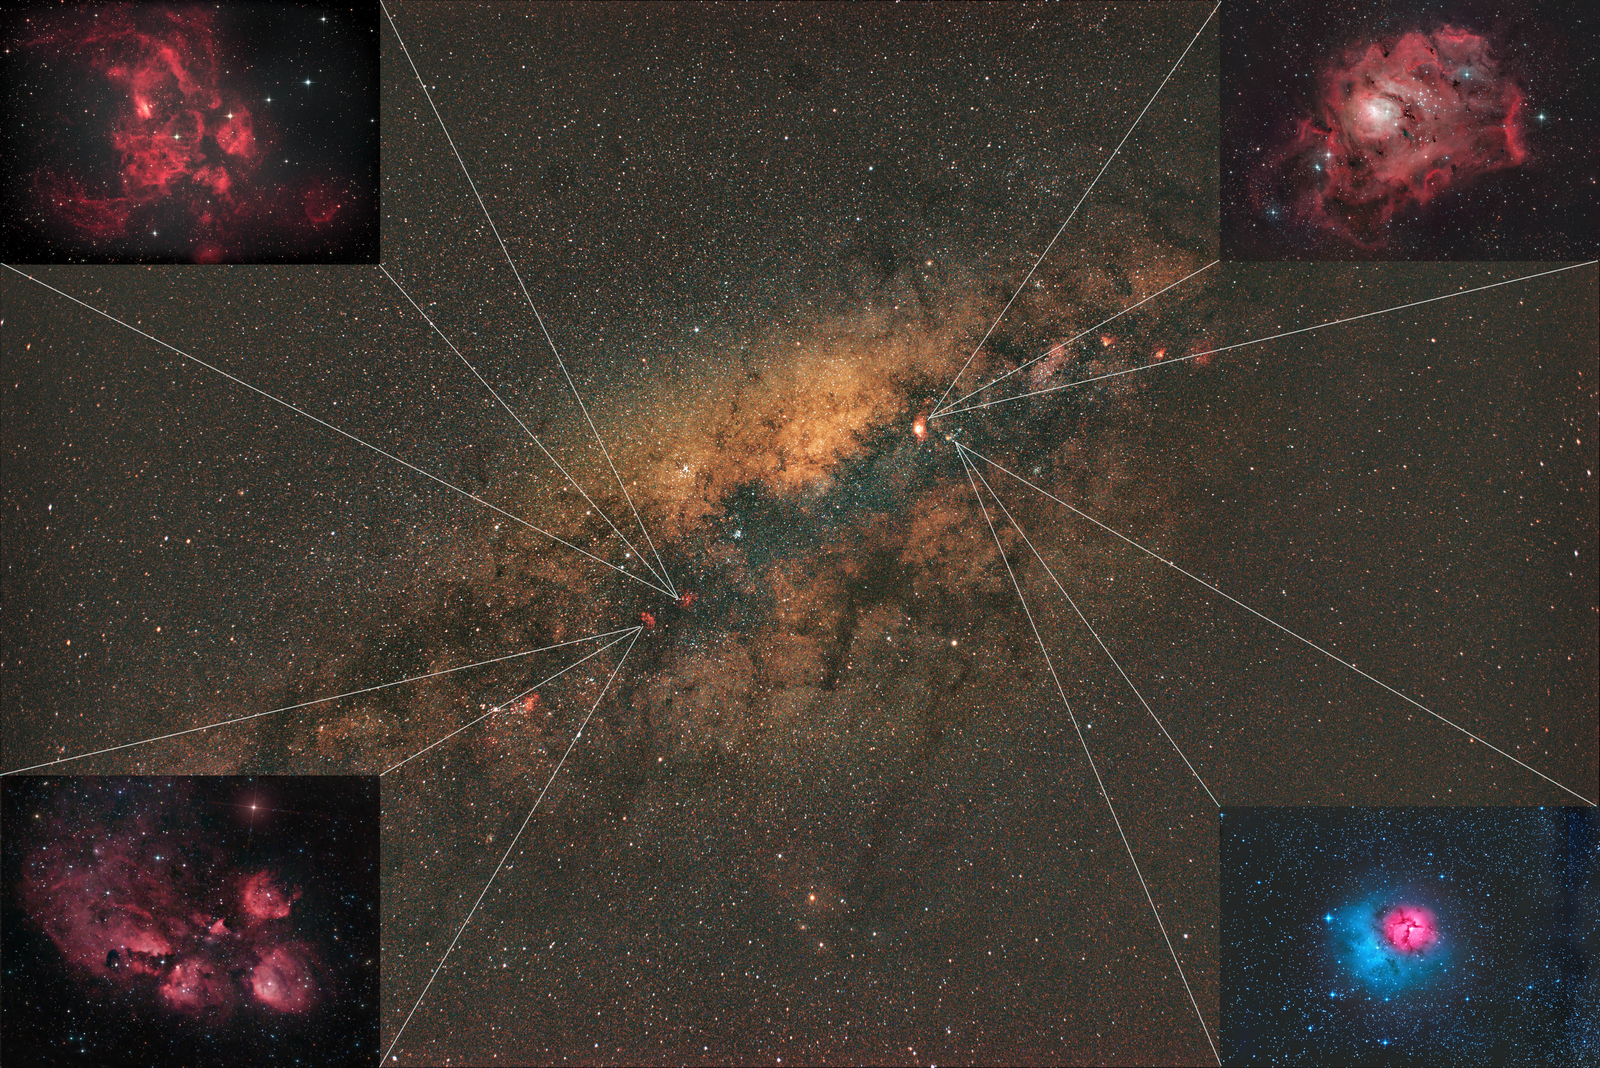 The Milky Way and DSO's